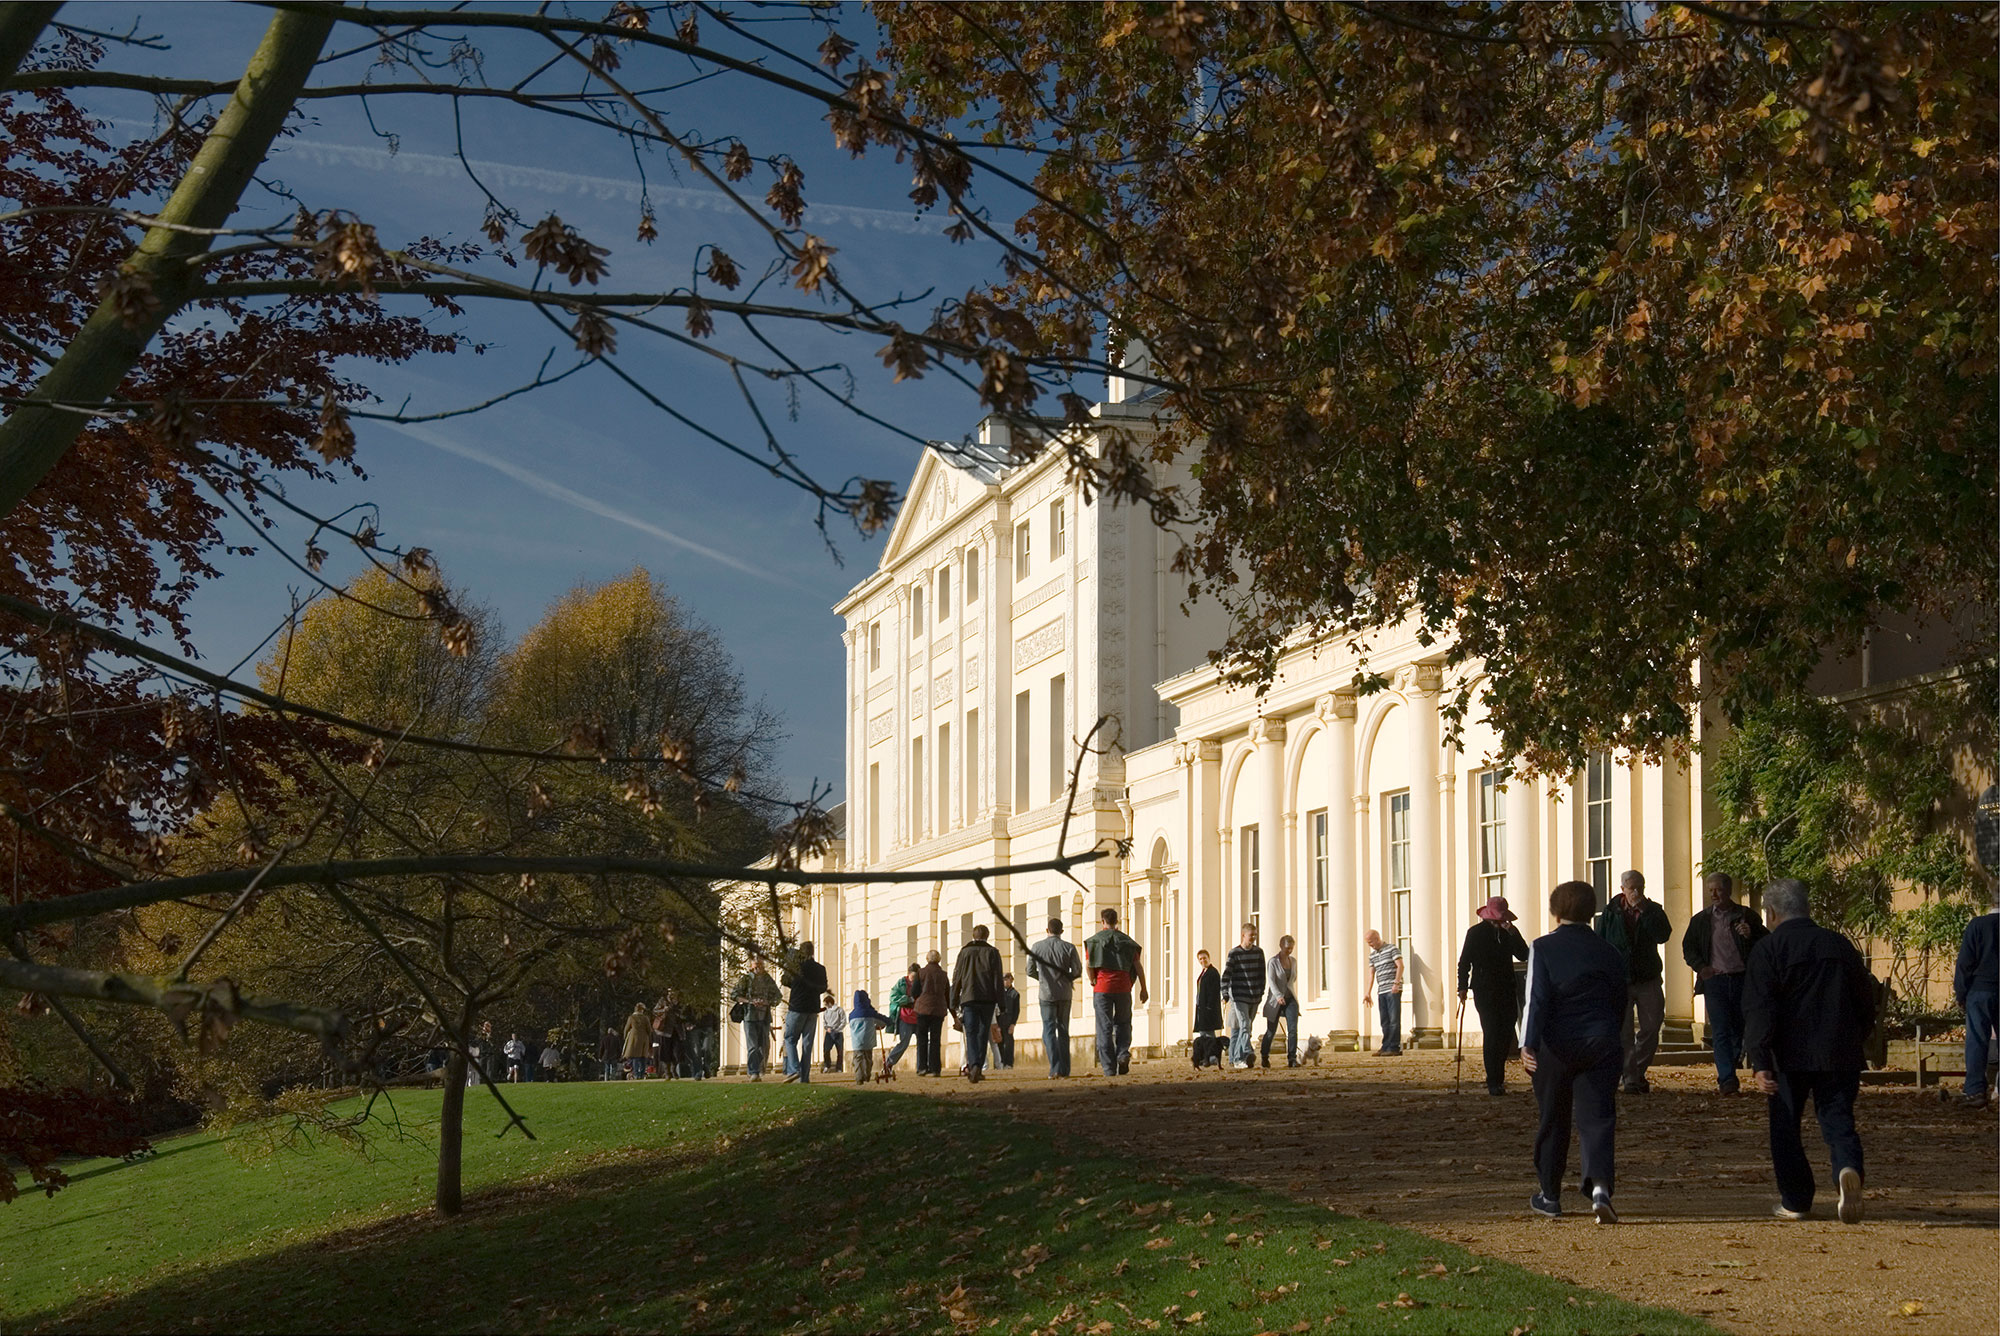 Photo of the a sunlit front of Kenwood House with people walking along the path in front